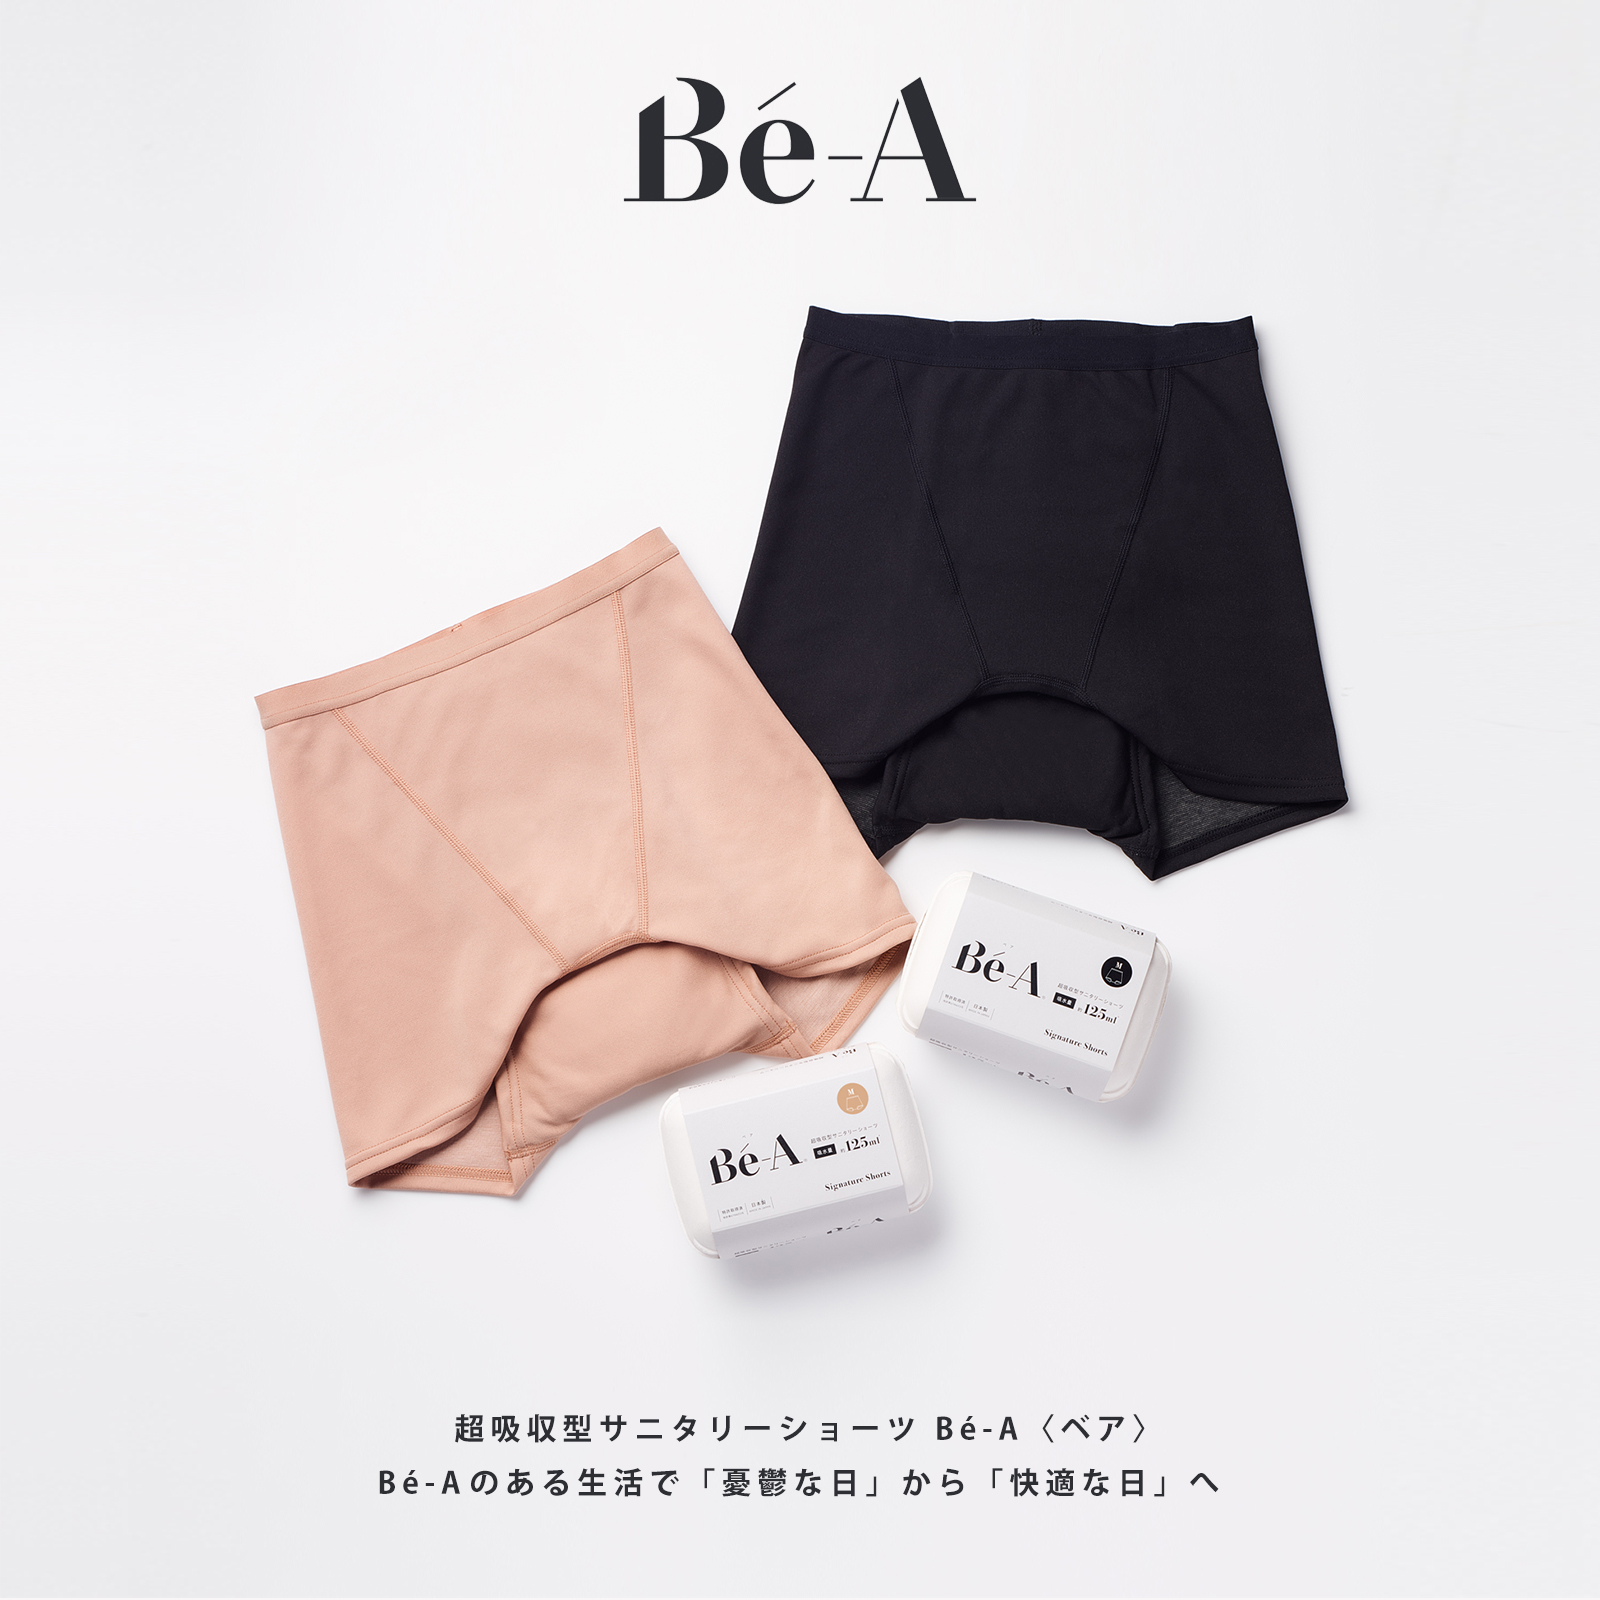 Be-A（ベア)